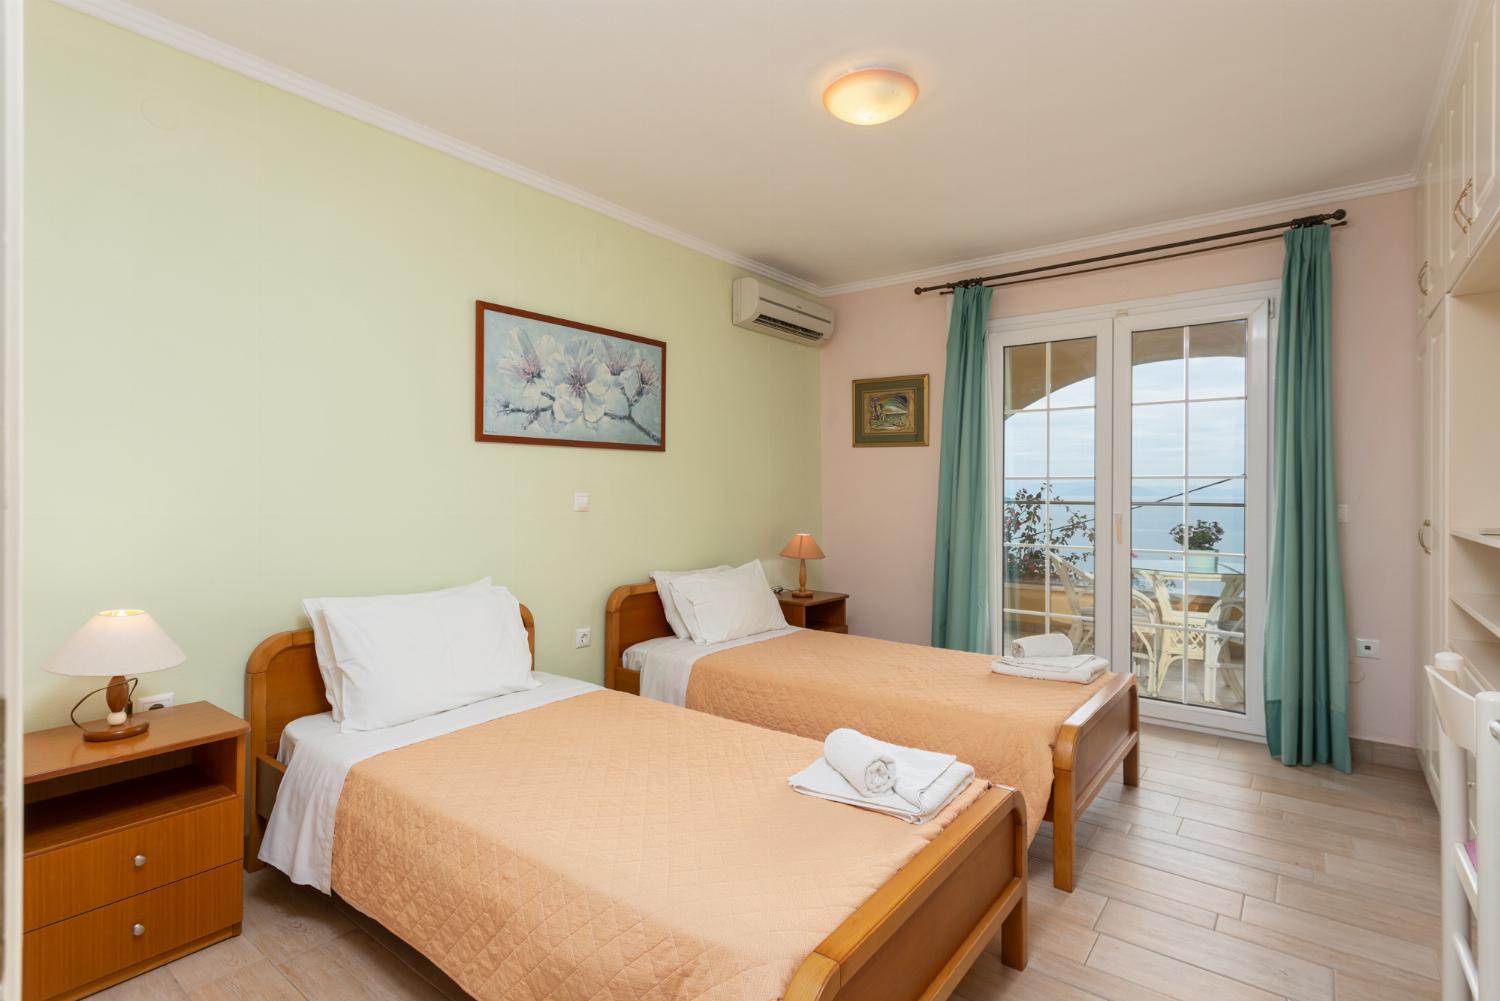 Twin bedroom on ground floor with A/C, sea views, and terrace access